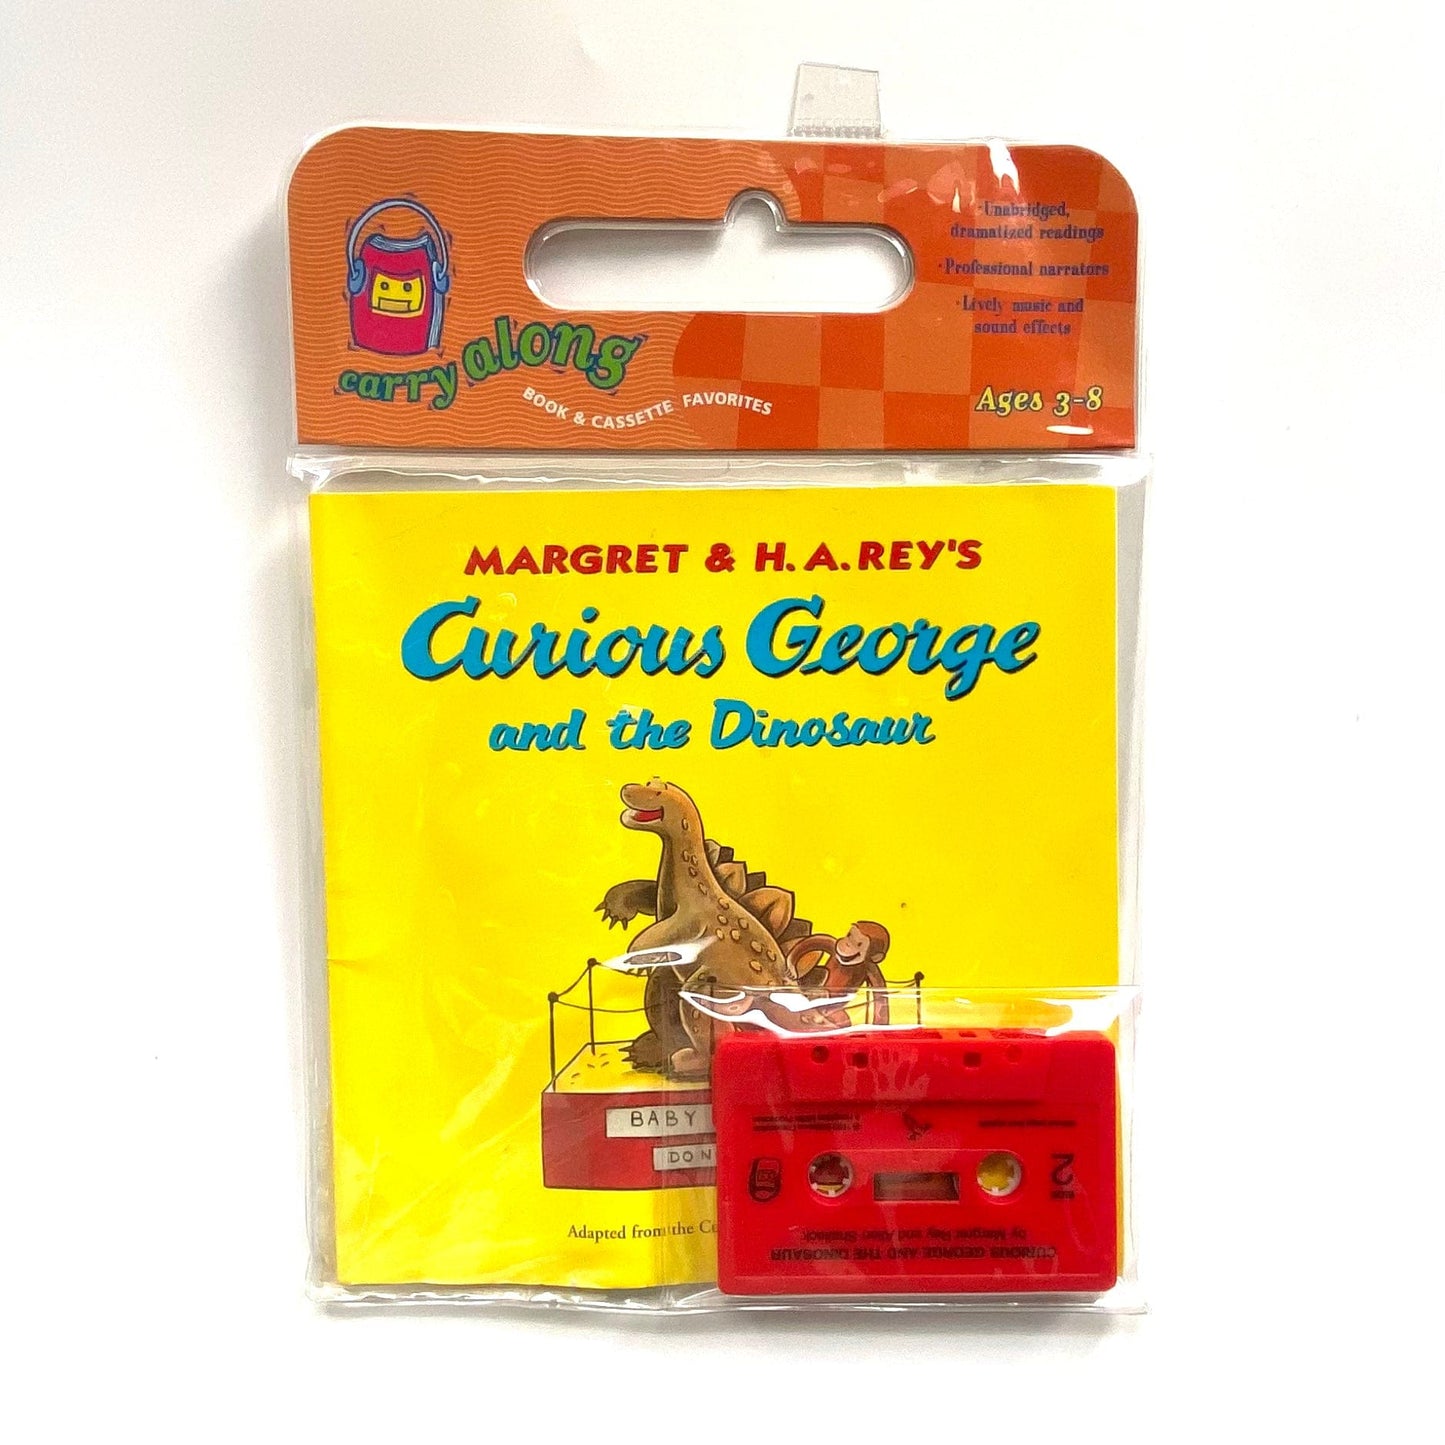 Vintage Carry-Along Childrens Book & Cassette Tape “Curious George and the Dinosaur”